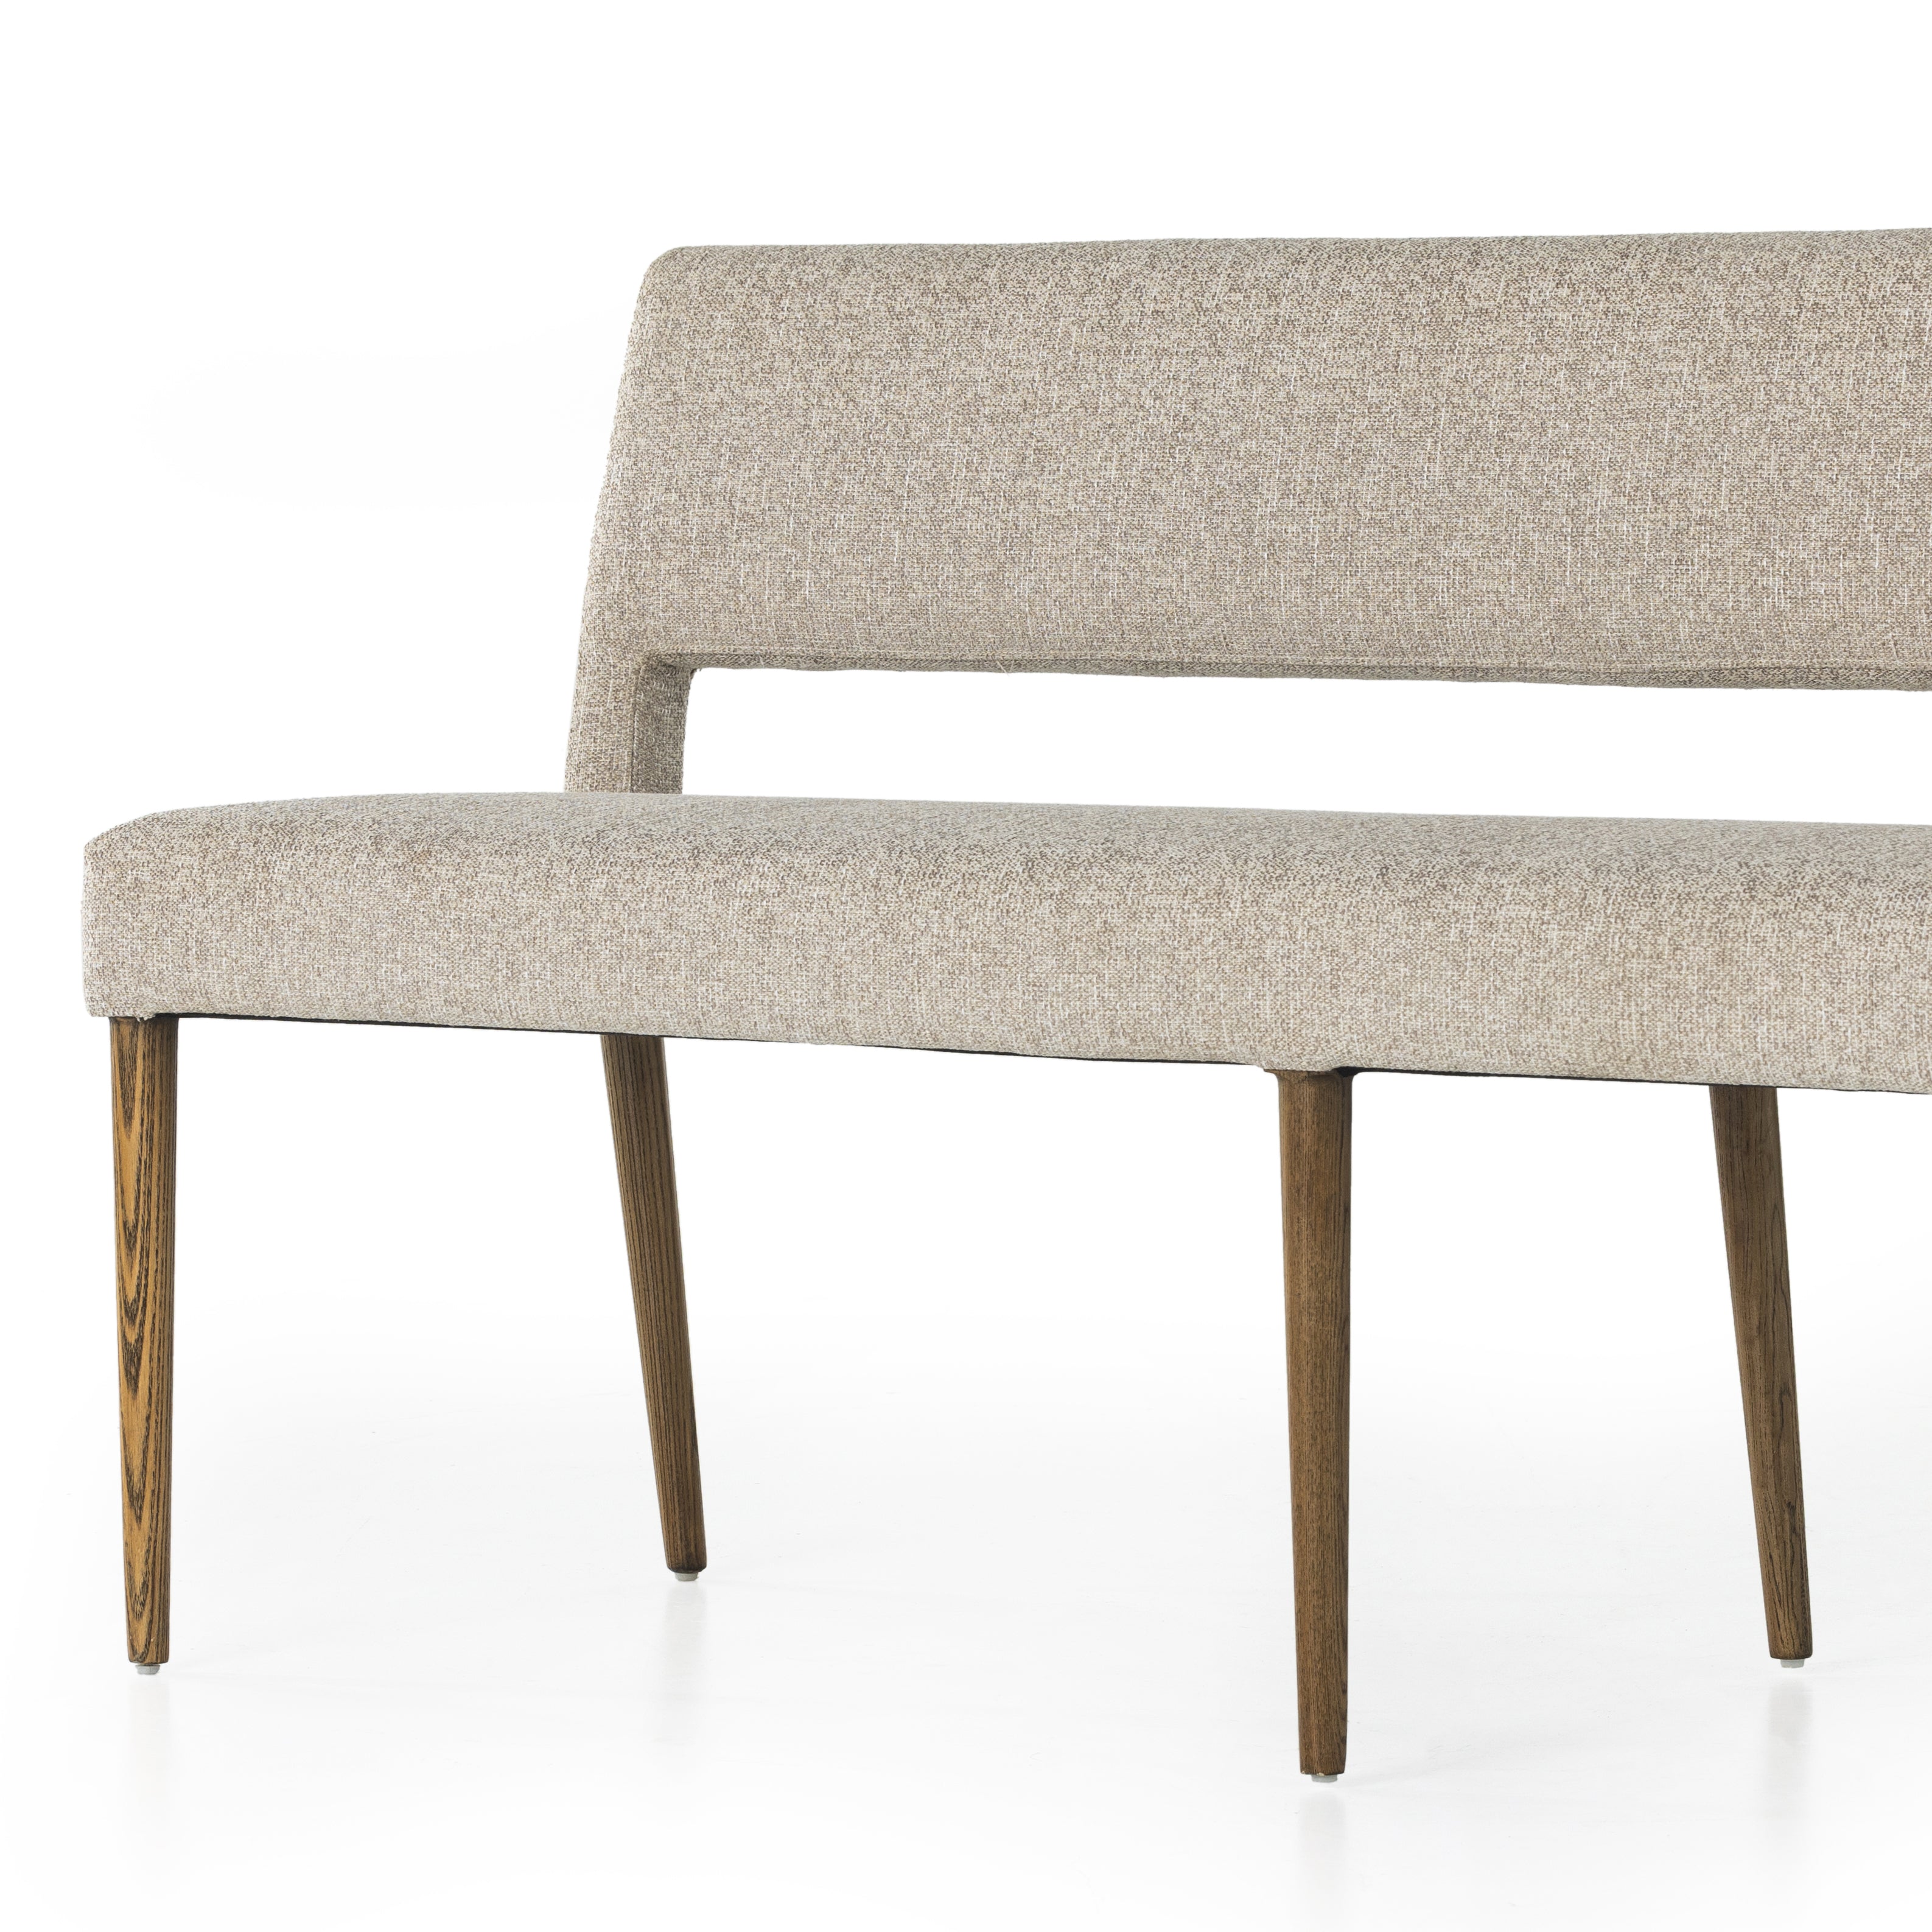 Simply styled and midcentury-minded, Joseph Light Camel Dining Bench is a textural light taupe upholstery that features a posterior cutout for added flair, with toasted nettlewood legs for natural contrast. Amethyst Home provides interior design services, furniture, rugs, and lighting in the Dallas metro area. 